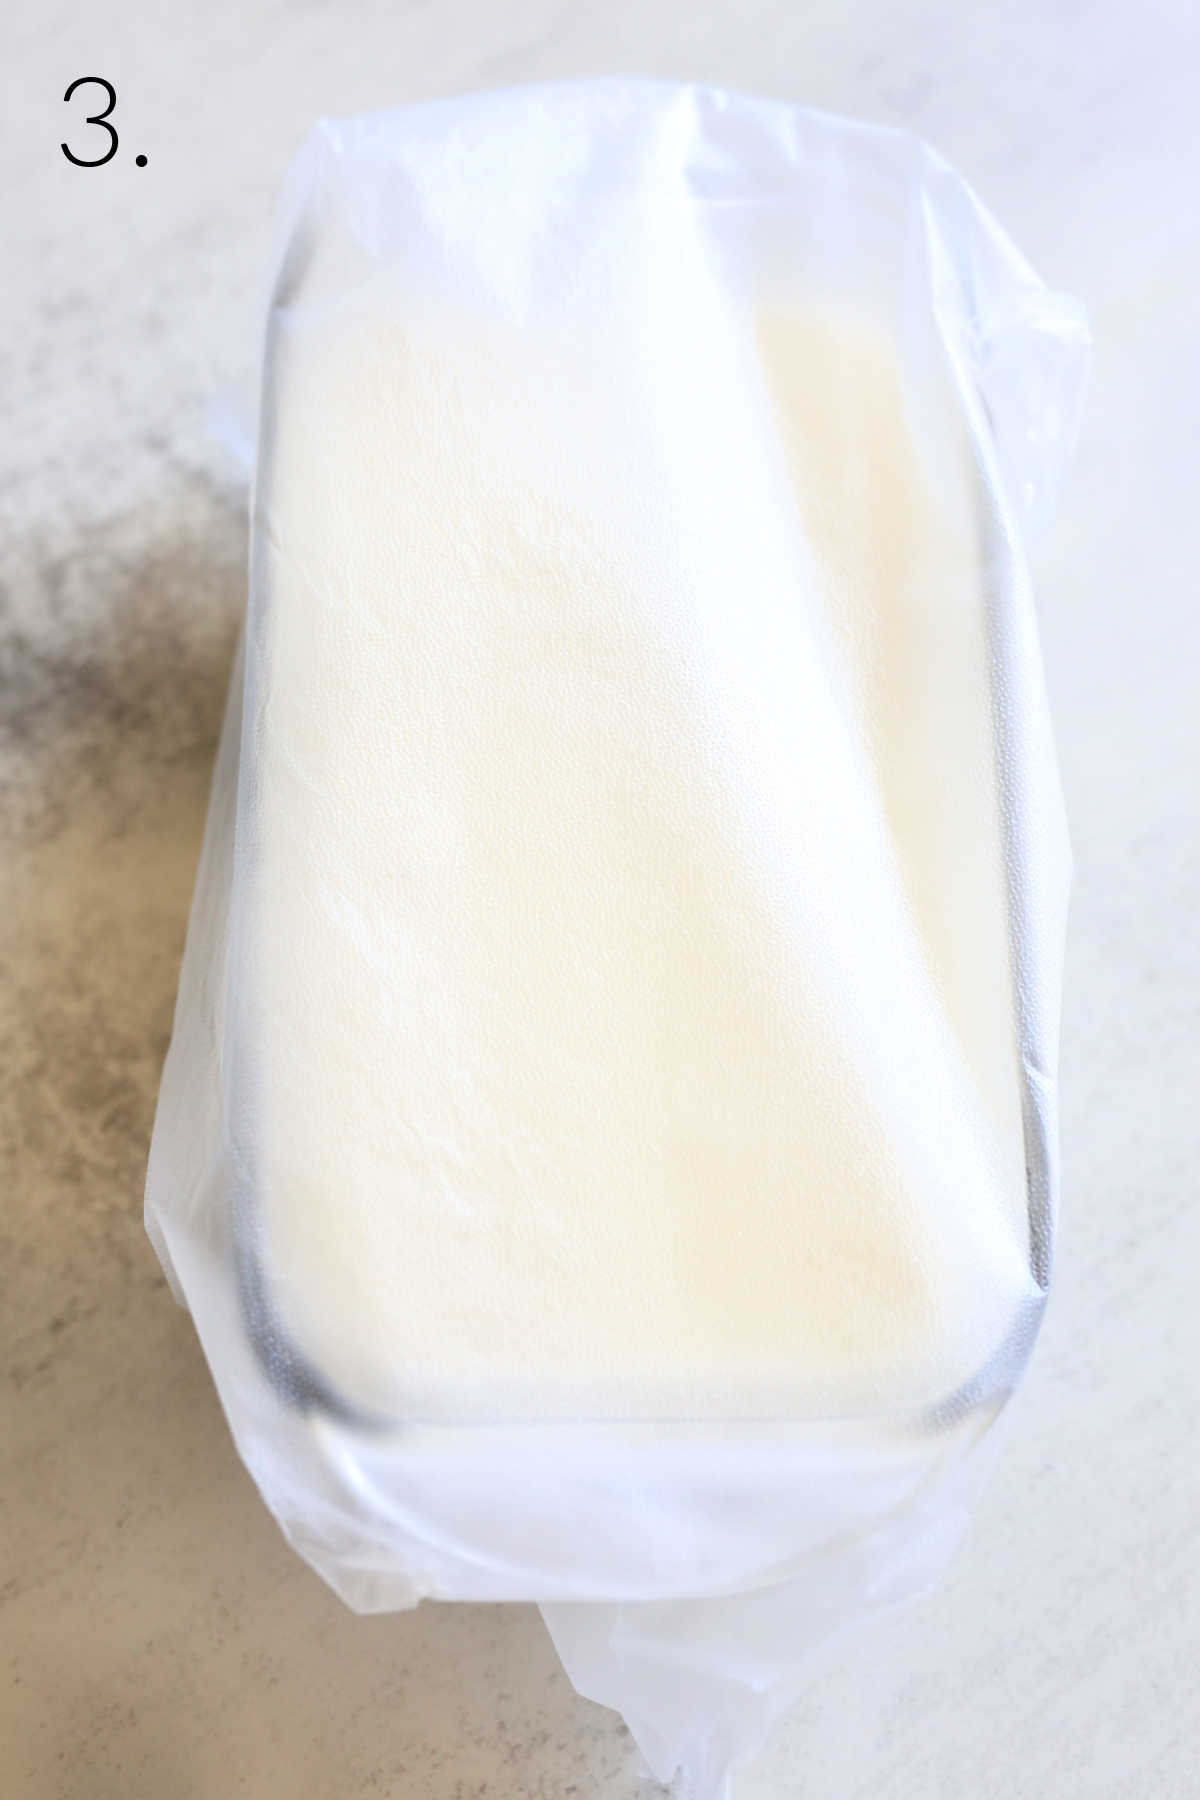 homemade dairy-free ice cream in a glass freezer container with a plastic wrap cover.